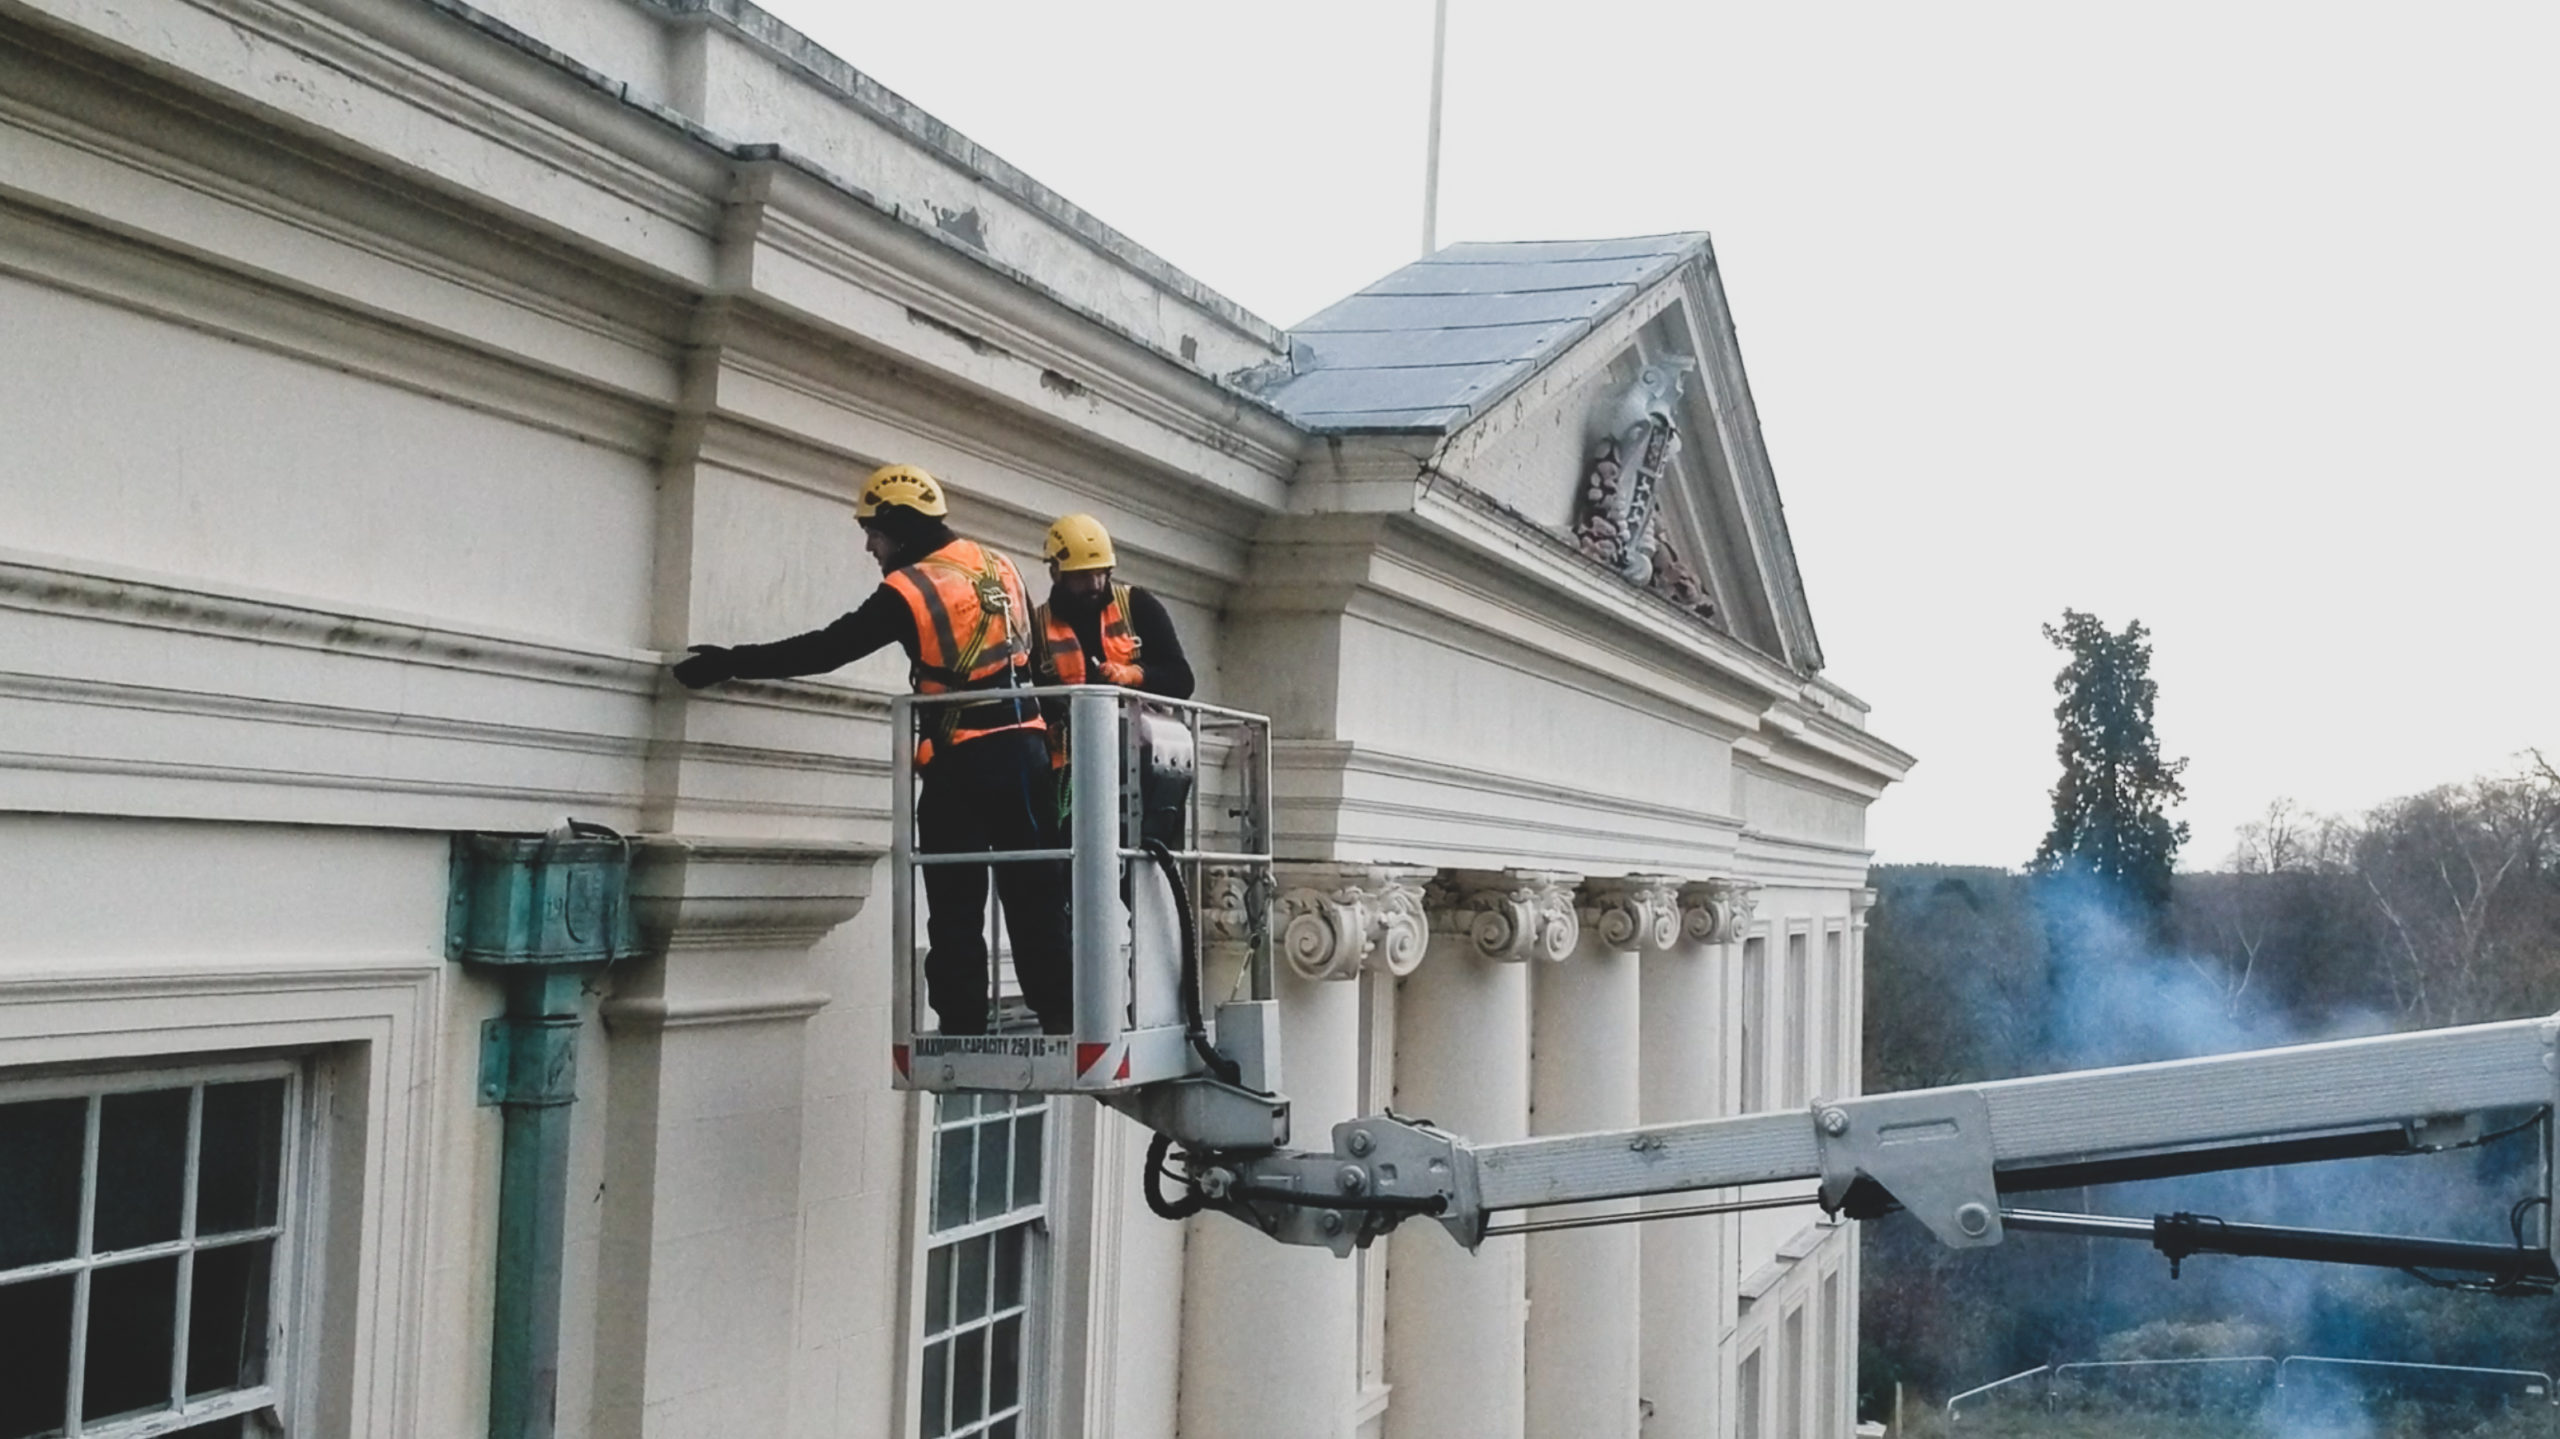 Listed cream rendered building being surveyed by two workers via MEWP access